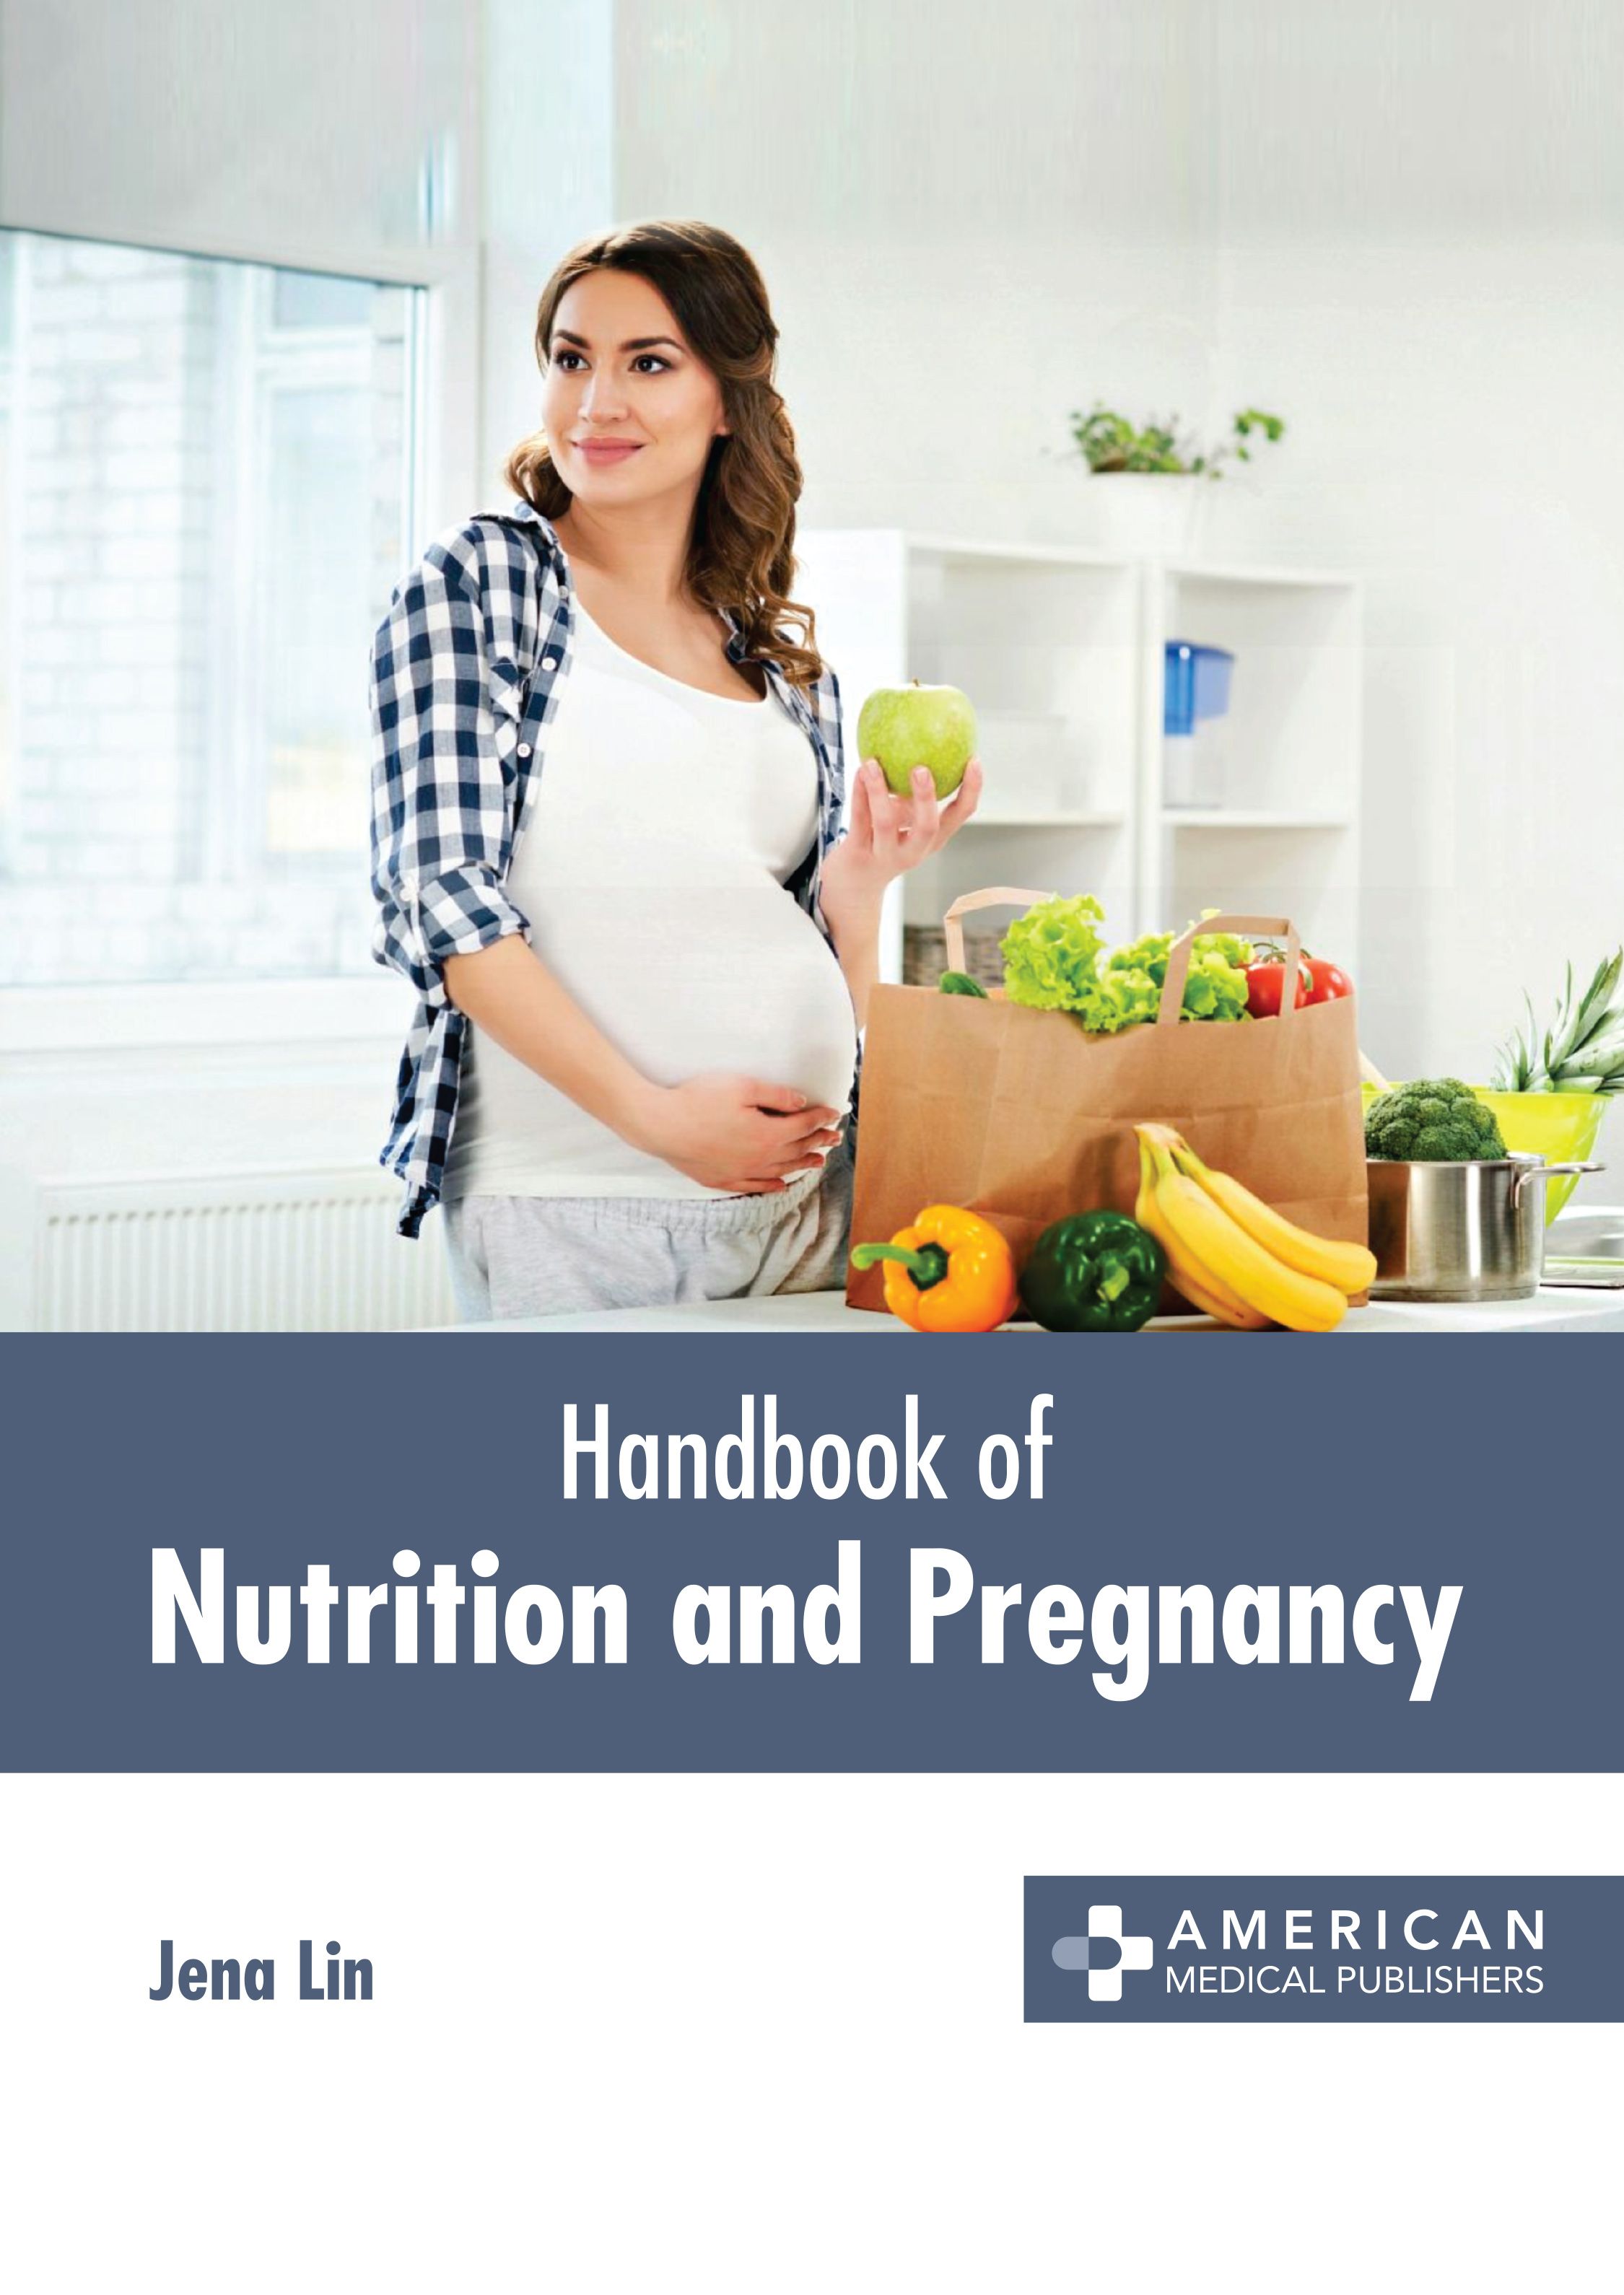 

exclusive-publishers/american-medical-publishers/handbook-of-nutrition-and-pregnancy-9781639276851